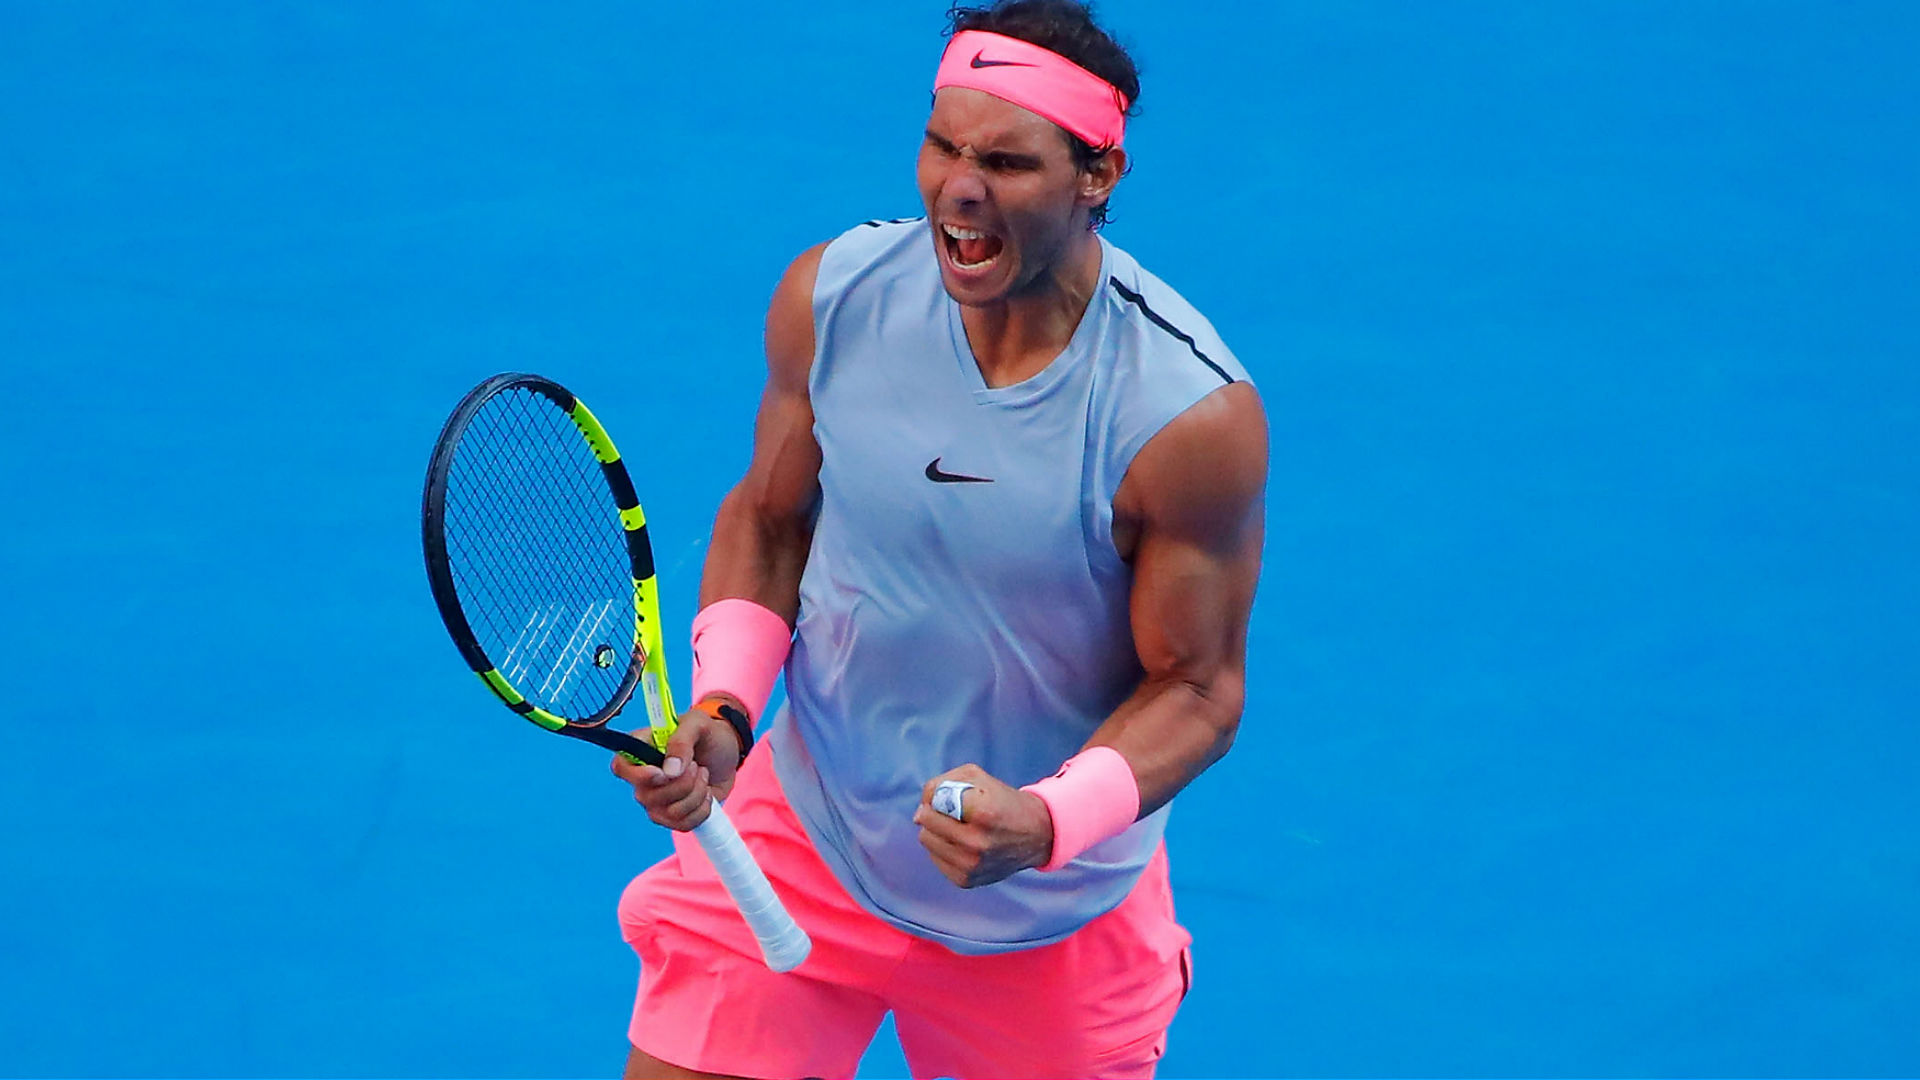 The reason tennis stars are wearing pink at the Australian Open